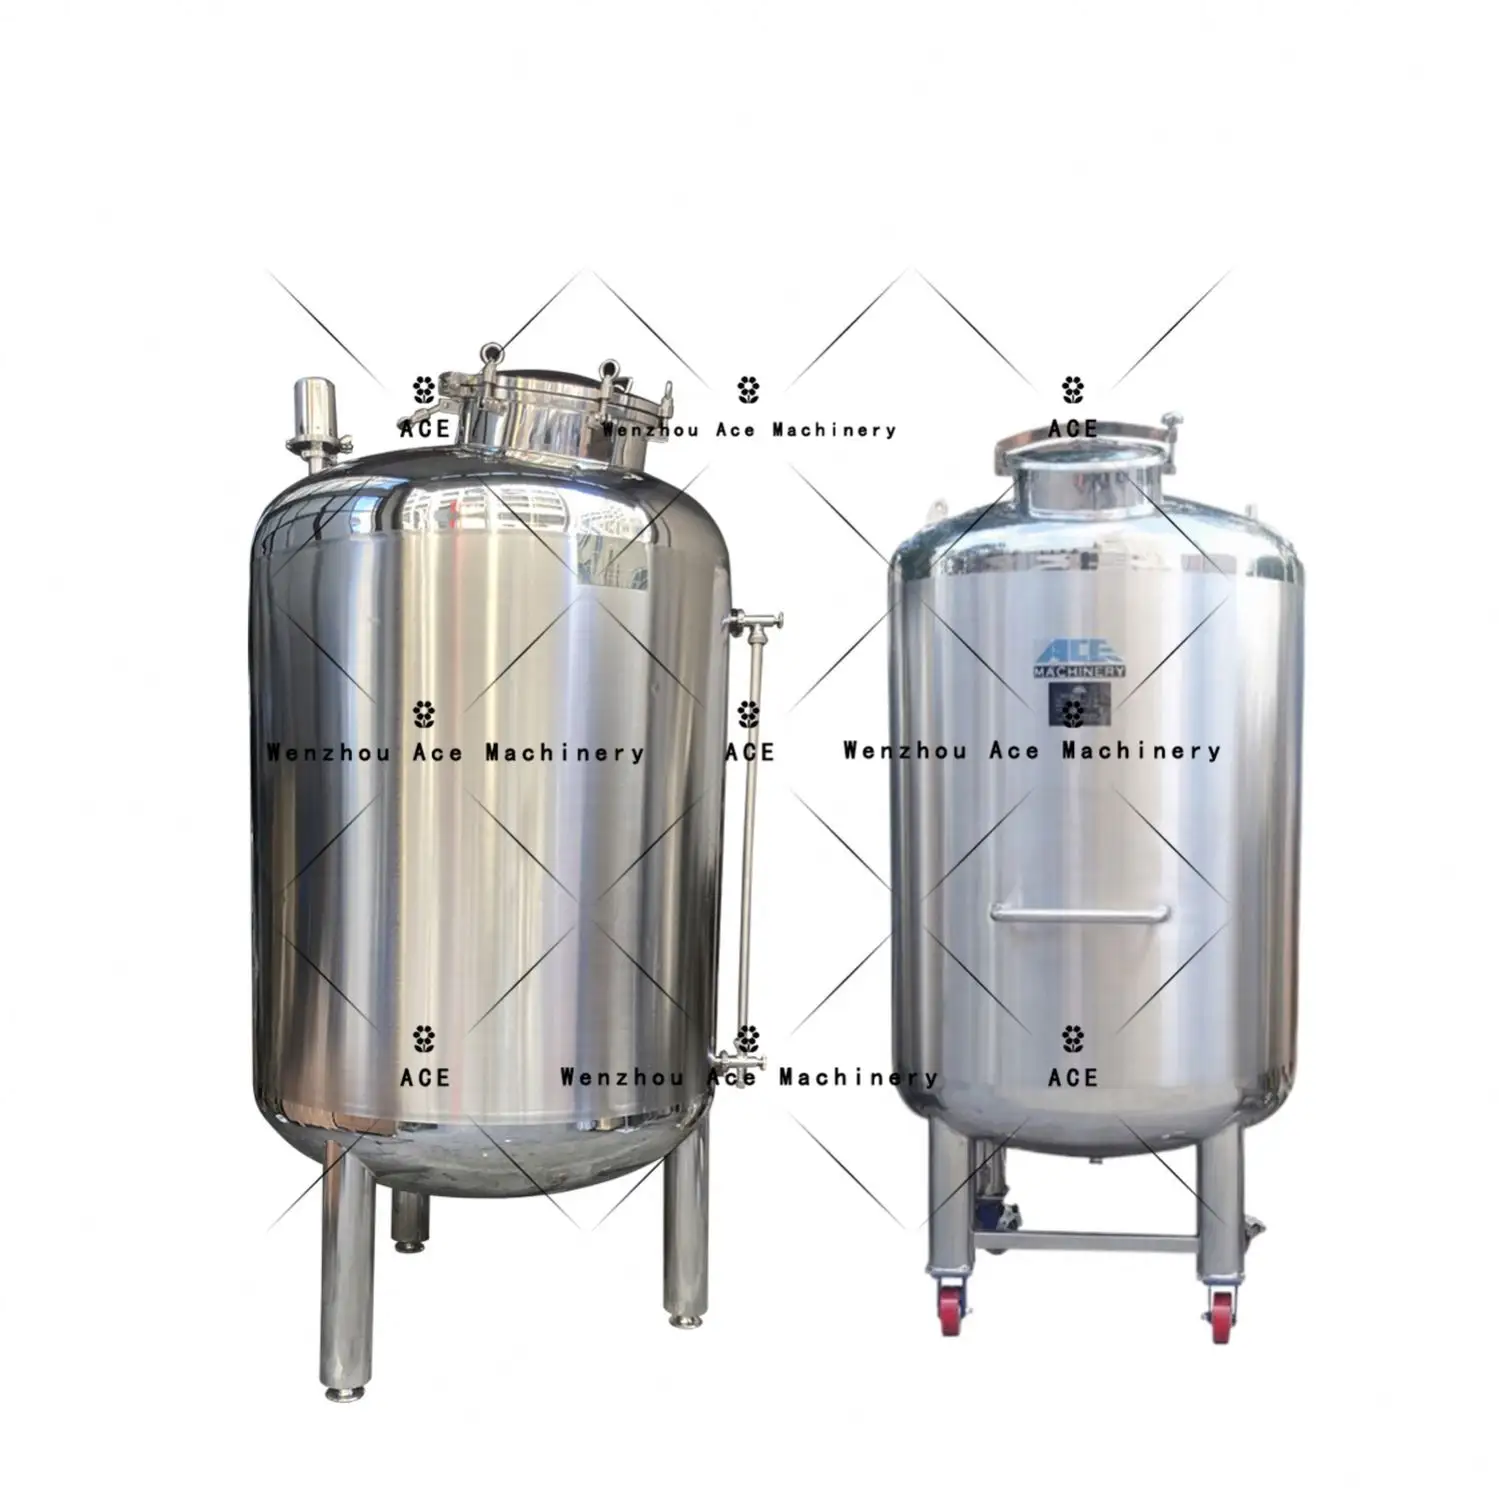 Multi Chemical Equipment Stainless Carbon Steel Petrol Fuel Water Storage Tank